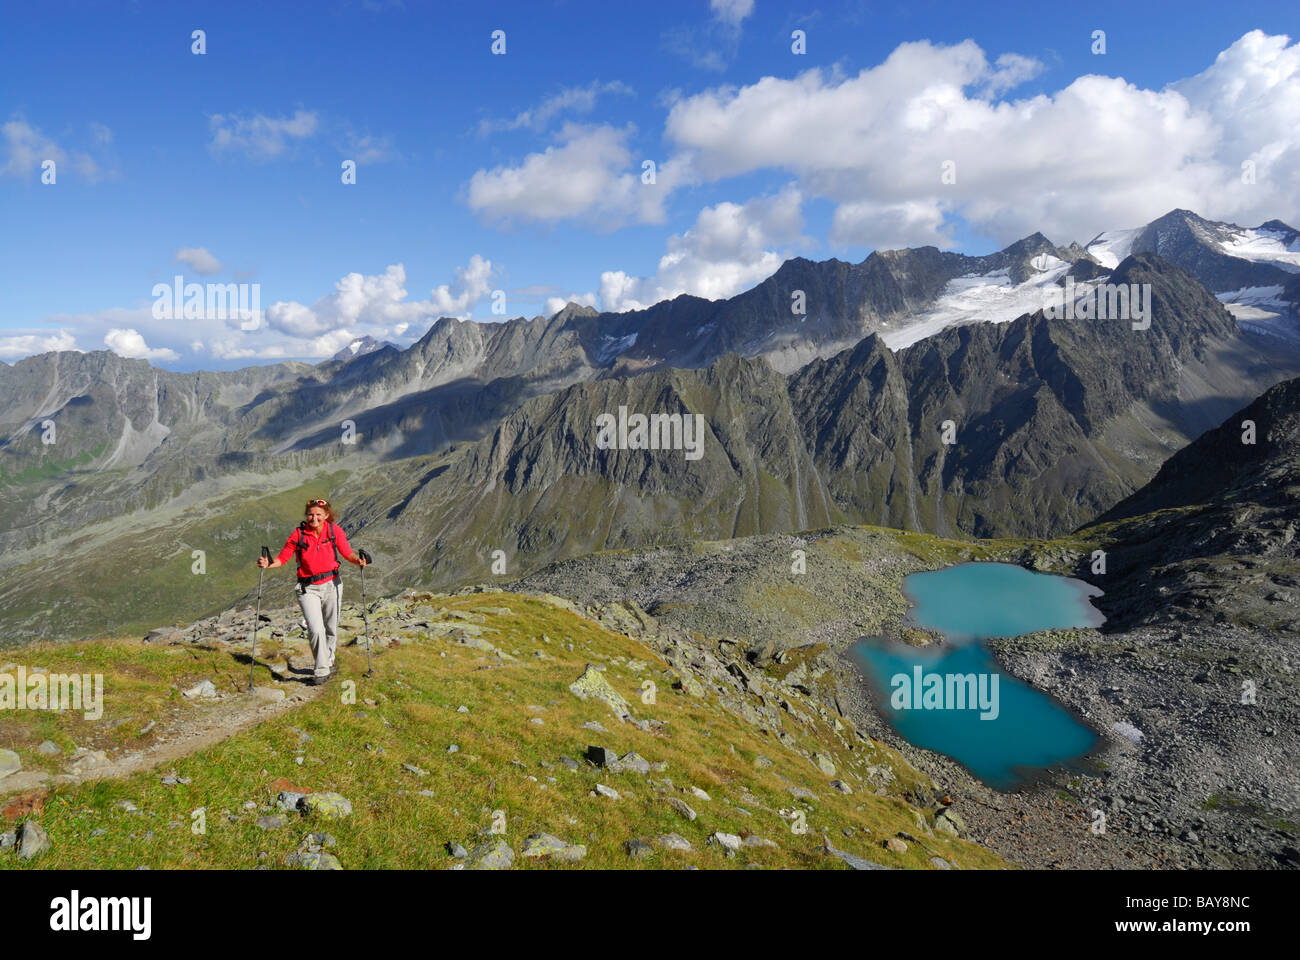 young woman hiking, ascent to Rinnenspitze, view to lake Rinnensee and Ruderhofspitze, Stubaier Alpen range, Stubai, Tyrol, Aust Stock Photo